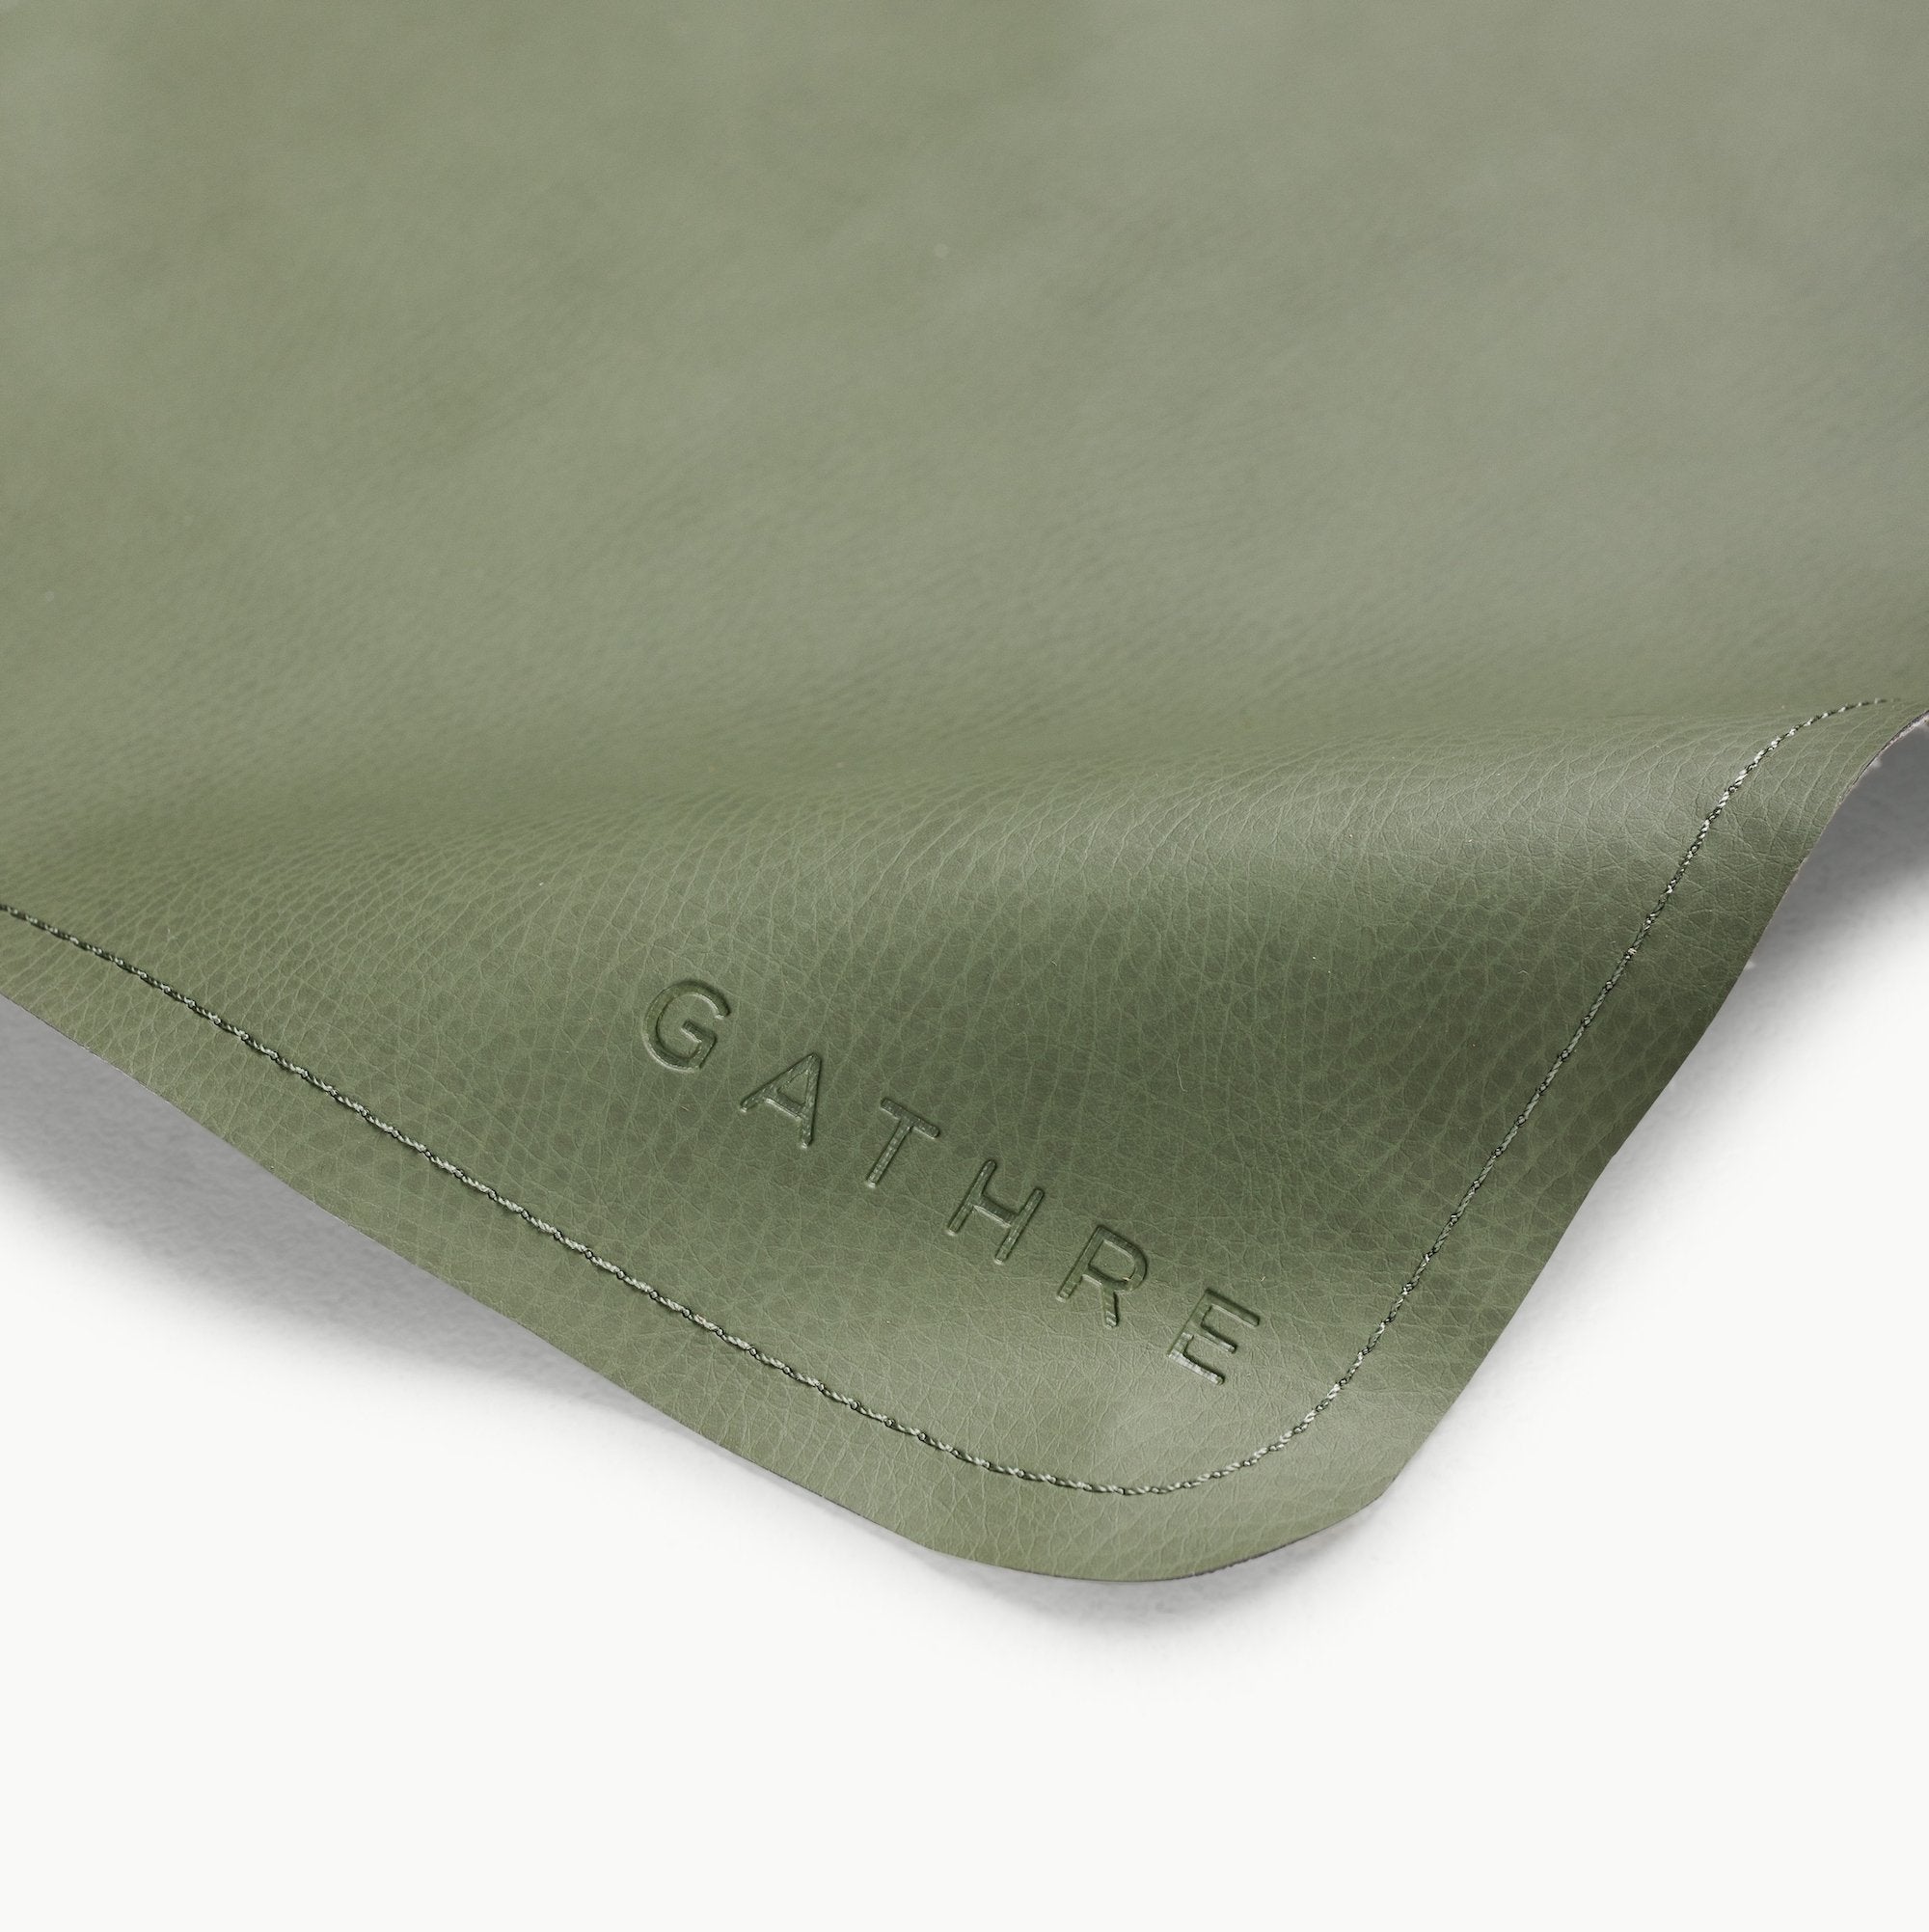 Thyme • Fog (on sale) / Circle@Hanging tab on the Thyme/Fog Maxi Mat